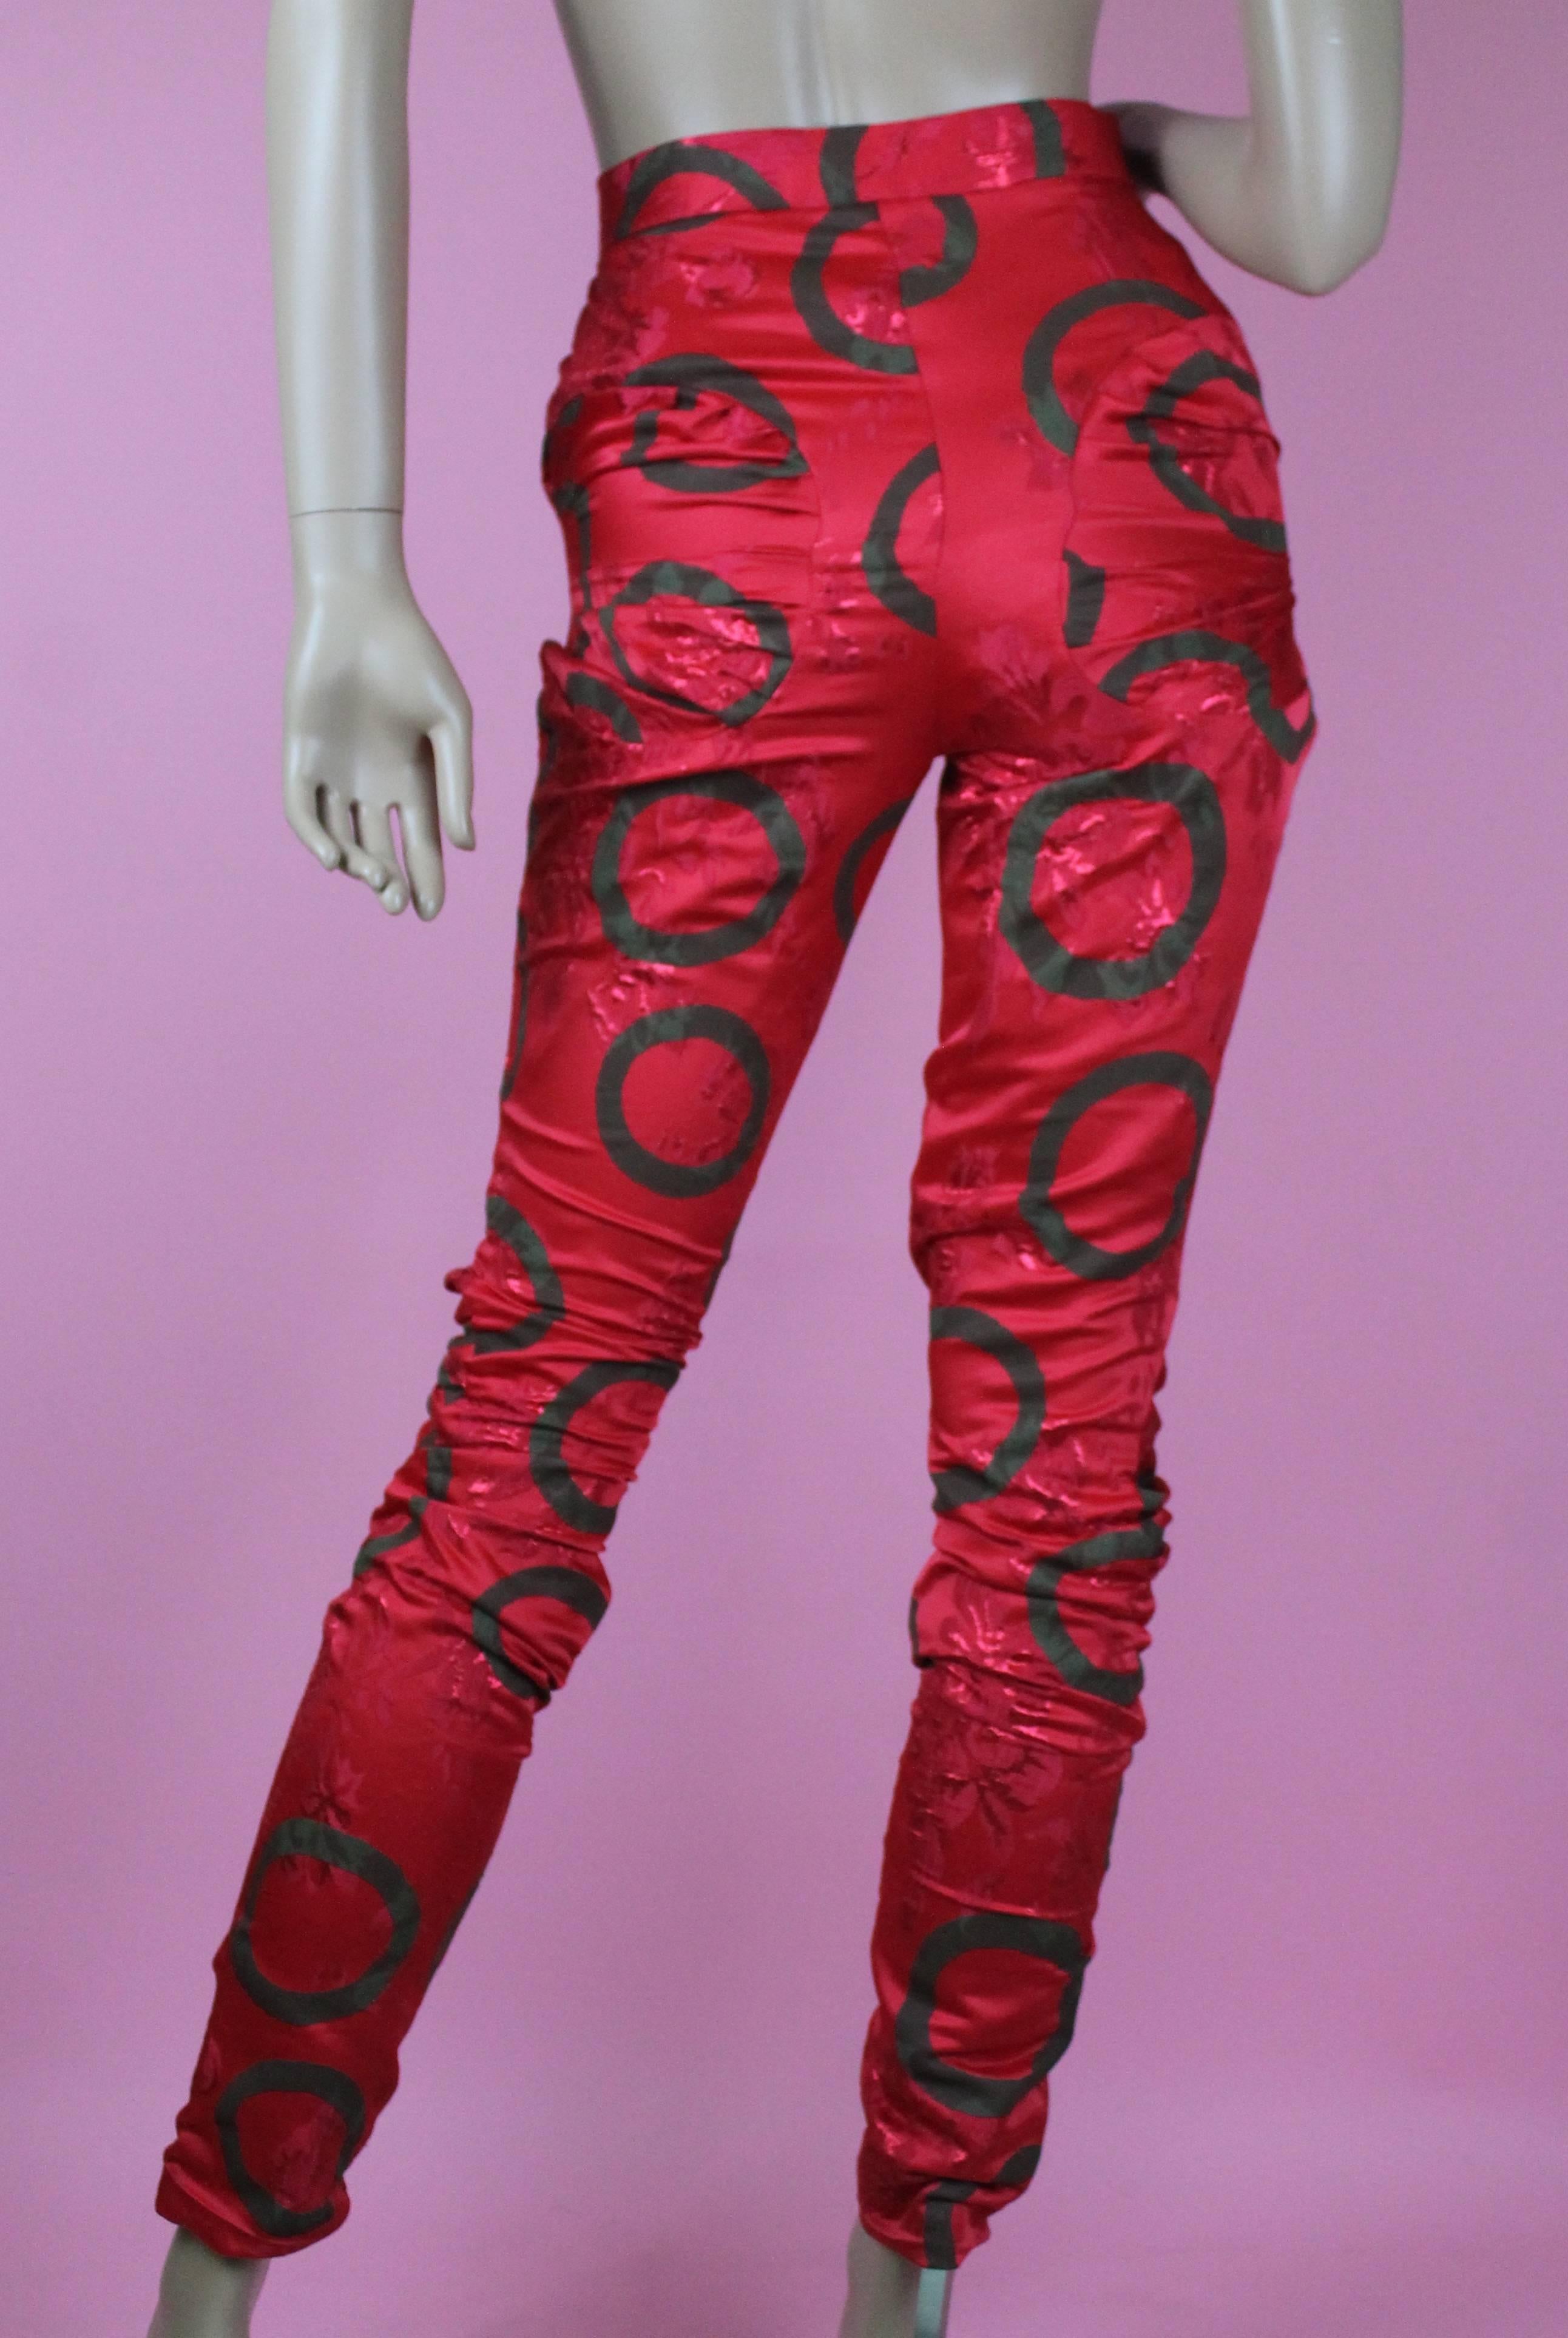 Vivienne Westwood Phoenix Trousers
-From the now defunct Gold Label division of the brand
-Seen on the runway for Autumn Winter 2013 during Paris Fashion Week
-Demi-couture trousers in red lurex fabric, this pair is new with tags 
-Has interesting